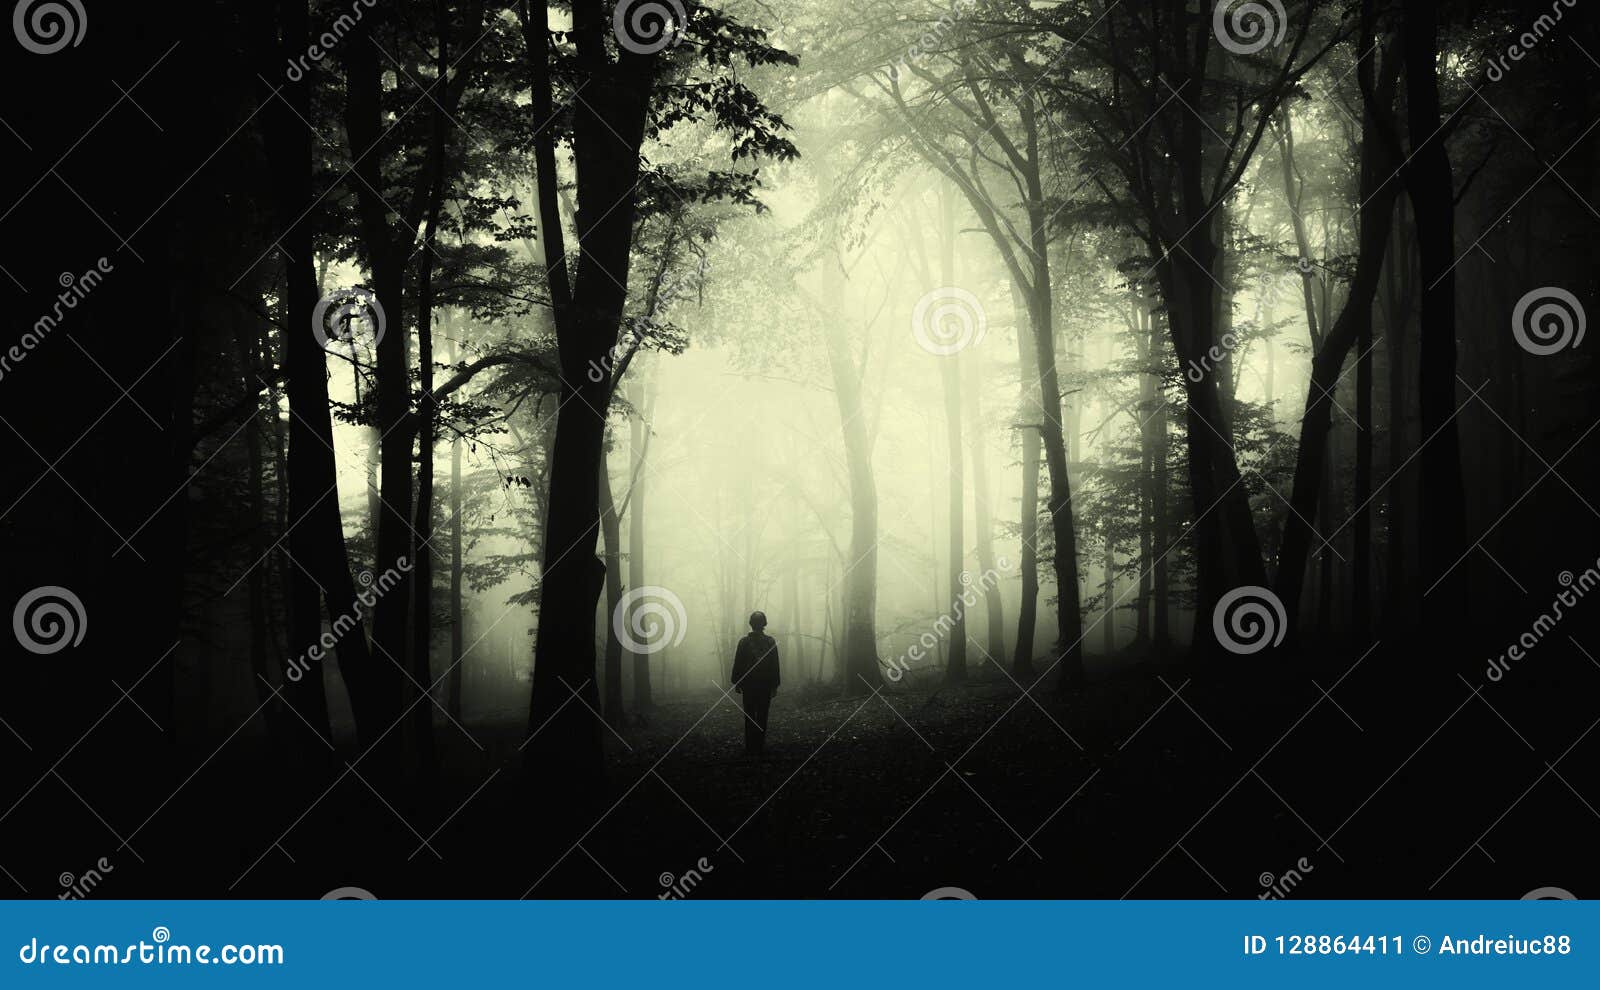 man in creepy forest with fog on halloween